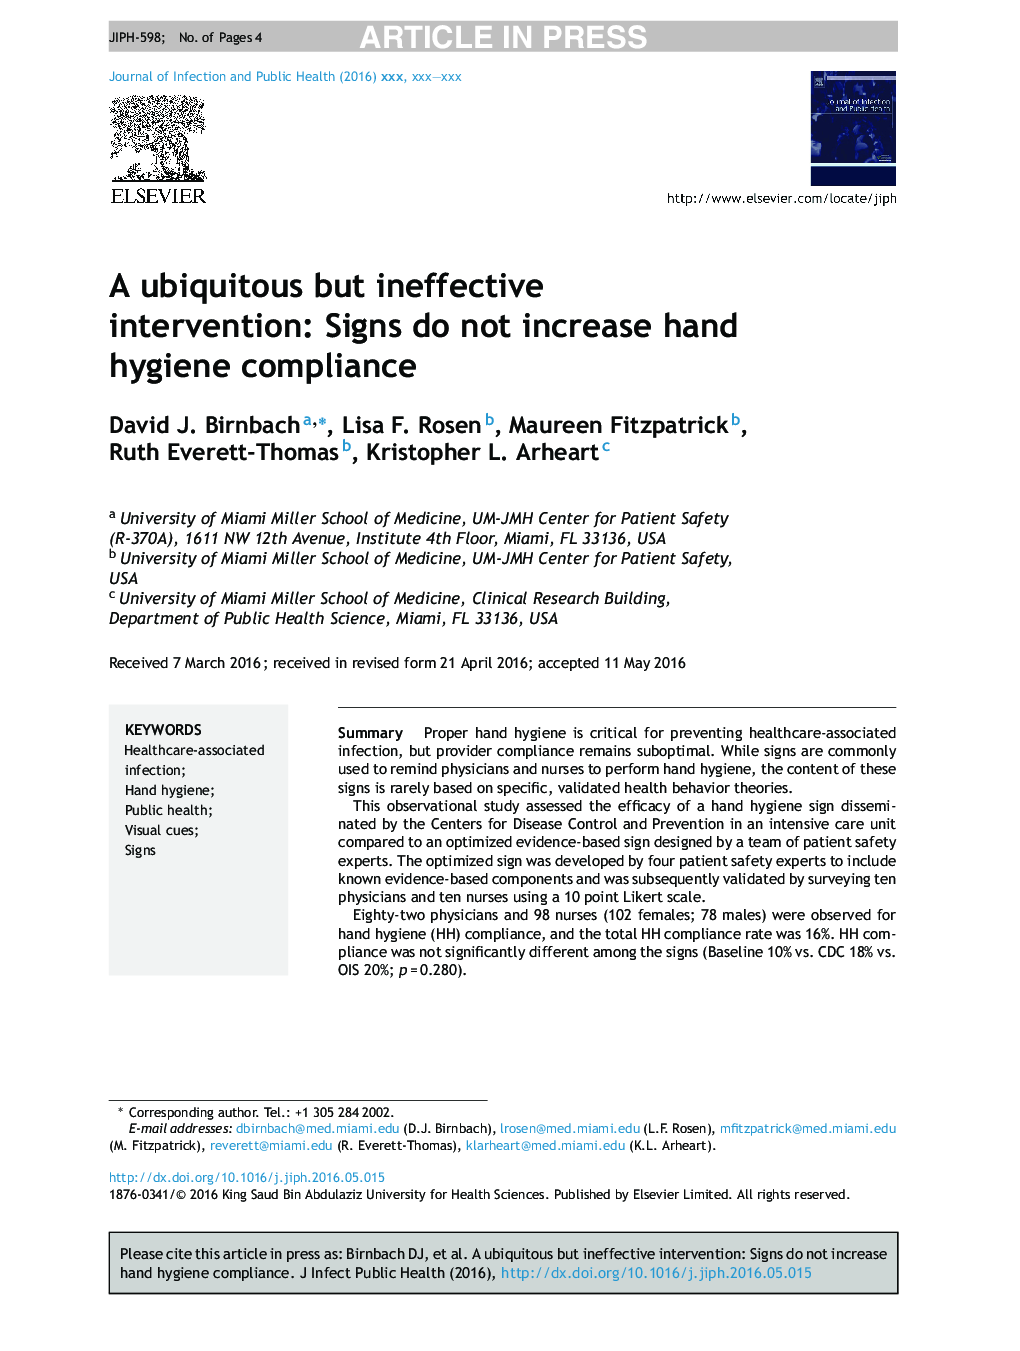 A ubiquitous but ineffective intervention: Signs do not increase hand hygiene compliance